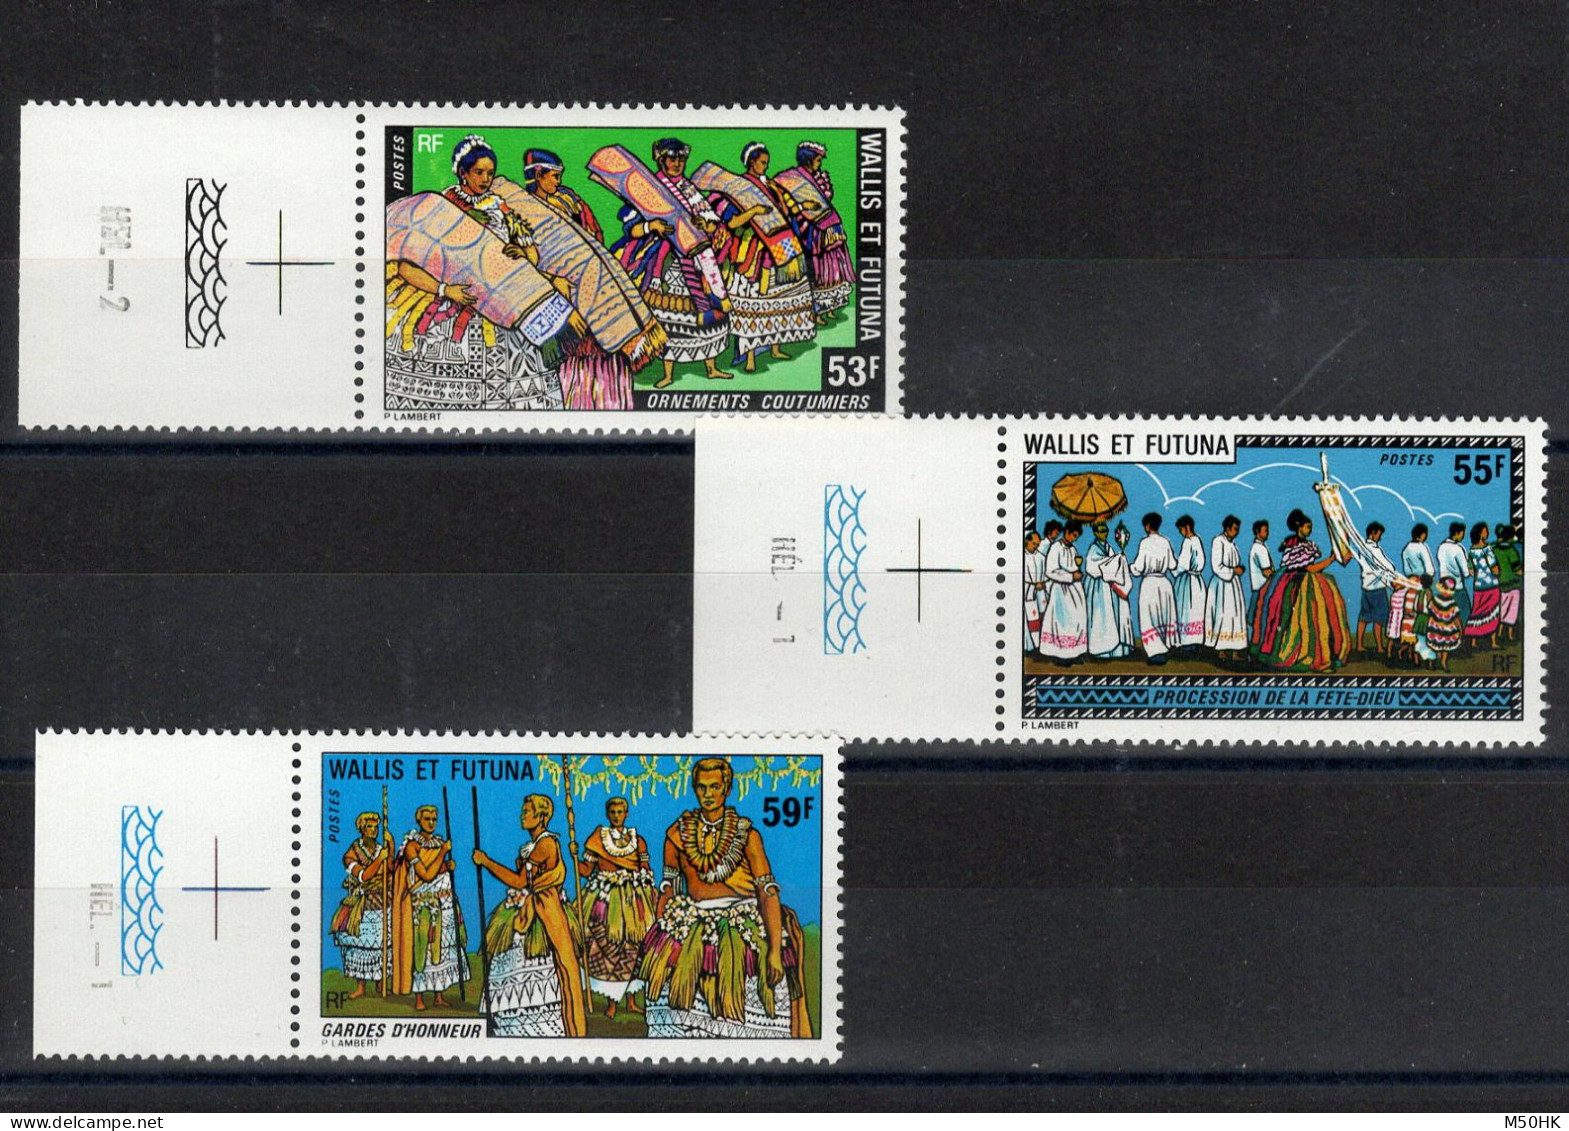 Wallis & Futuna - YV 221 à 223 N** MNH Complète Luxe , Coutumes & Traditions , Cote 11,60 Euros - Ongebruikt